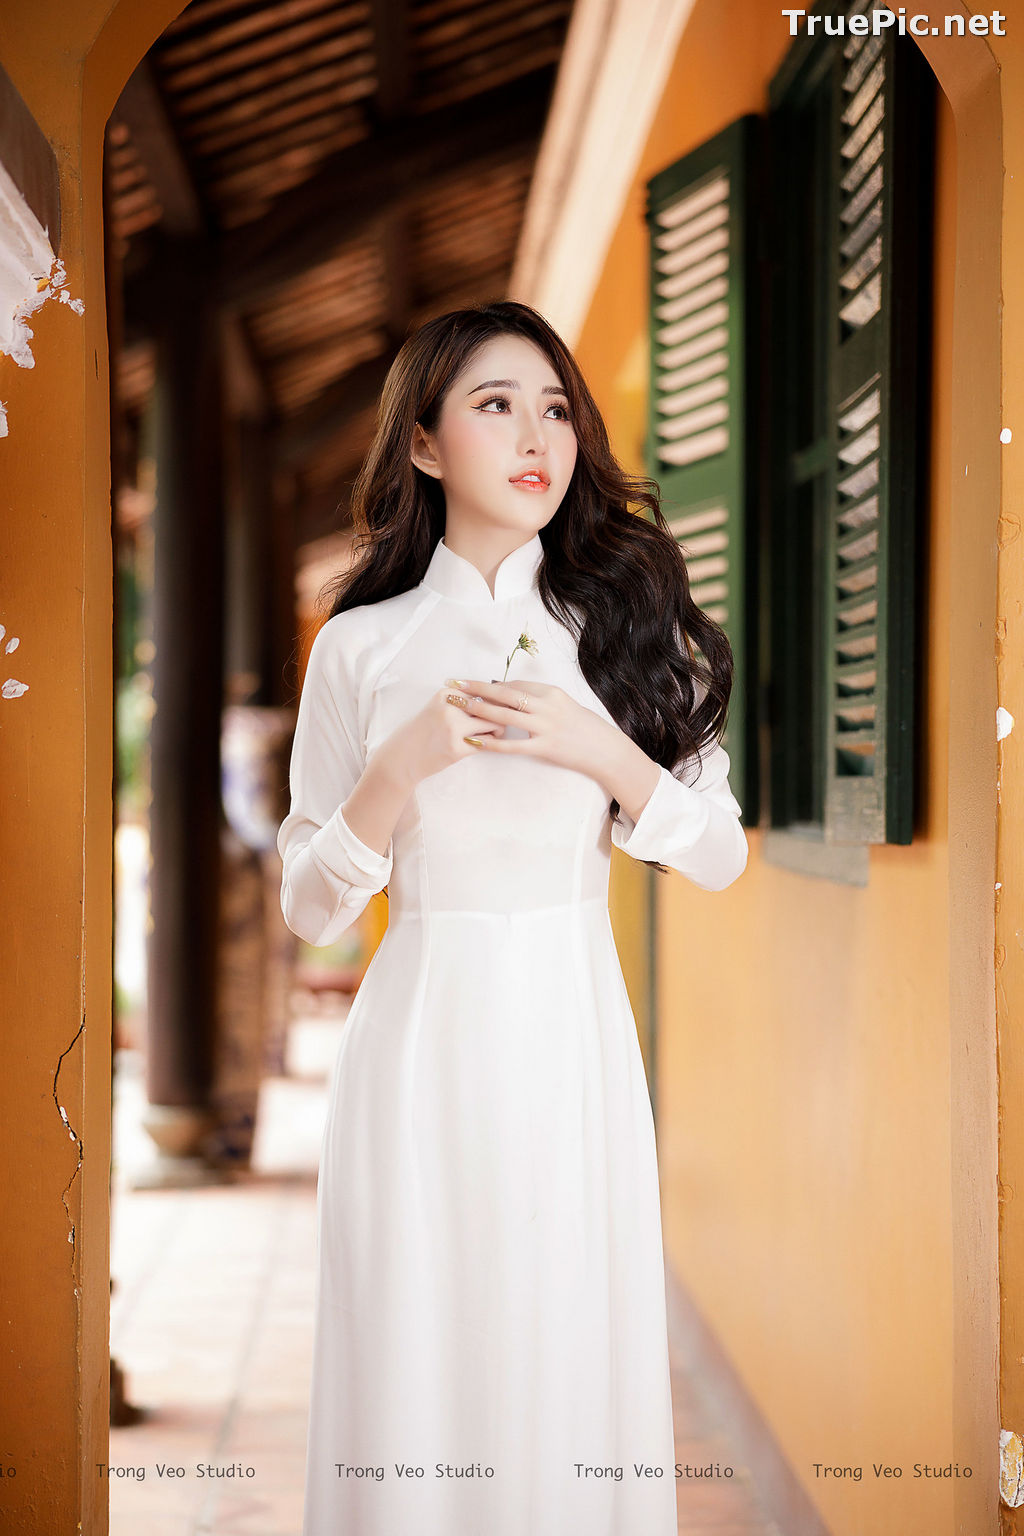 Image The Beauty of Vietnamese Girls with Traditional Dress (Ao Dai) #3 - TruePic.net - Picture-16